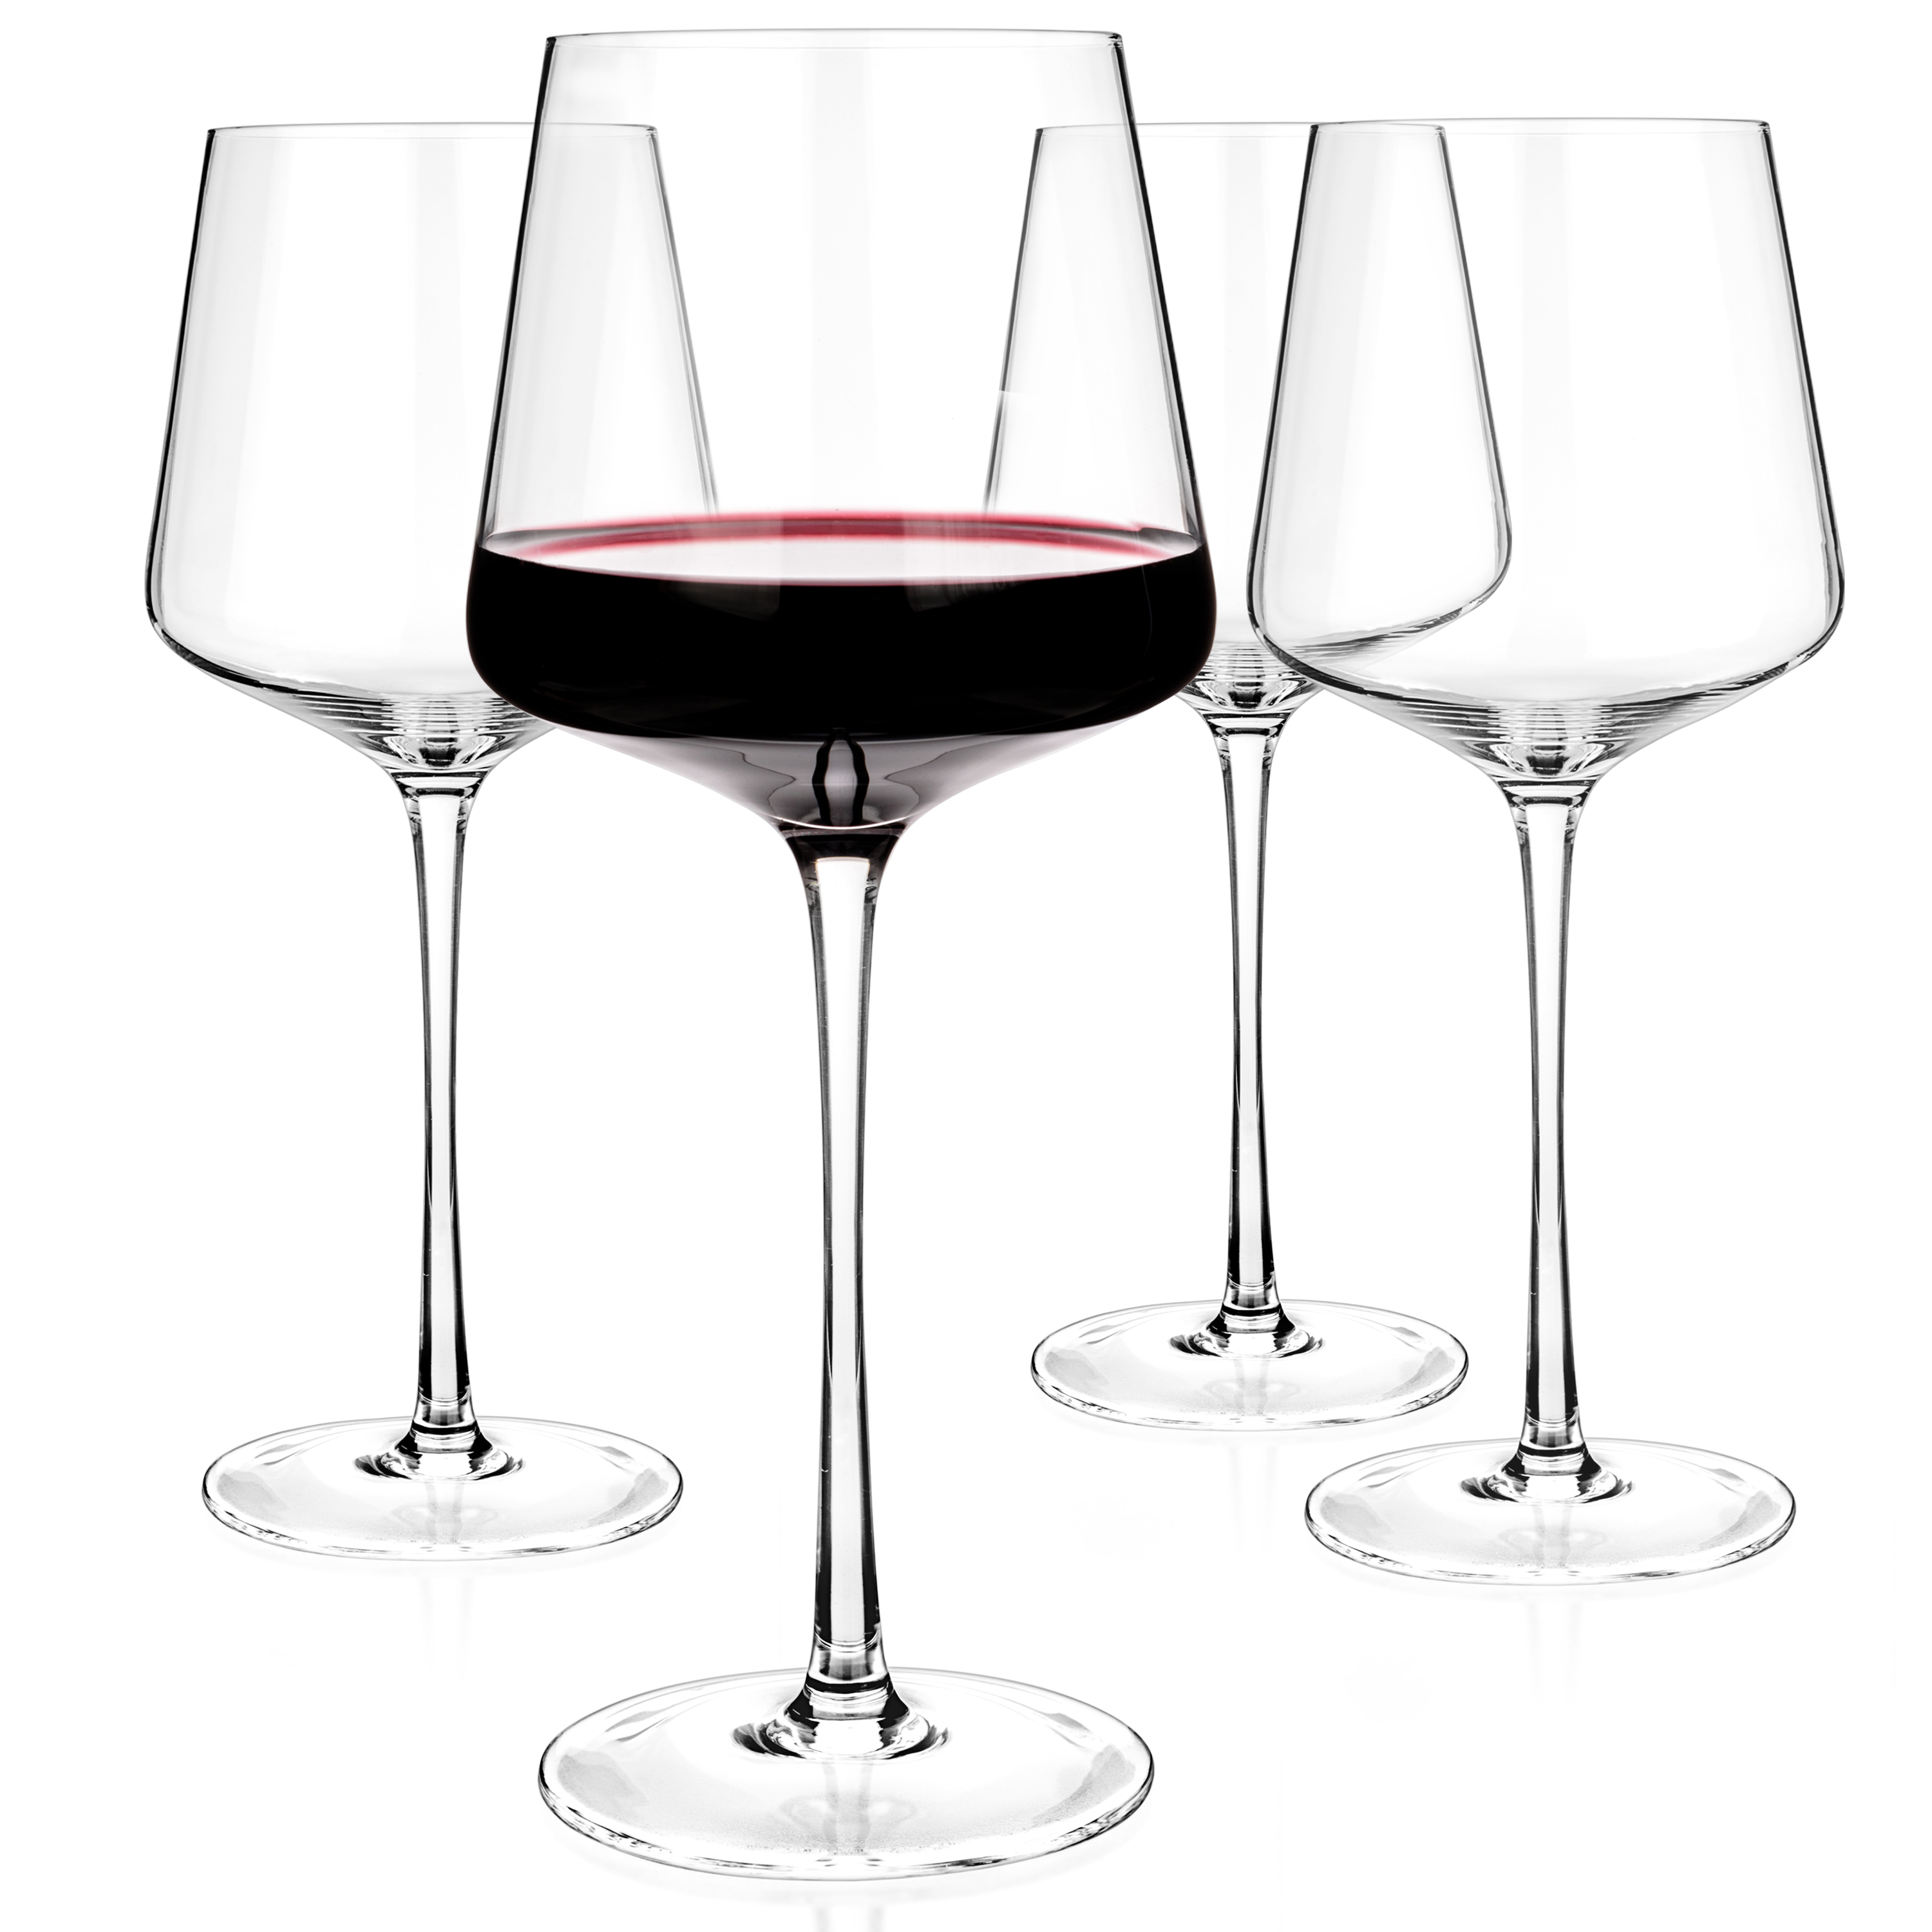 https://www.luxbe.com/images/detailed/4/red-white-wine-crystal-clear-glasses.jpg